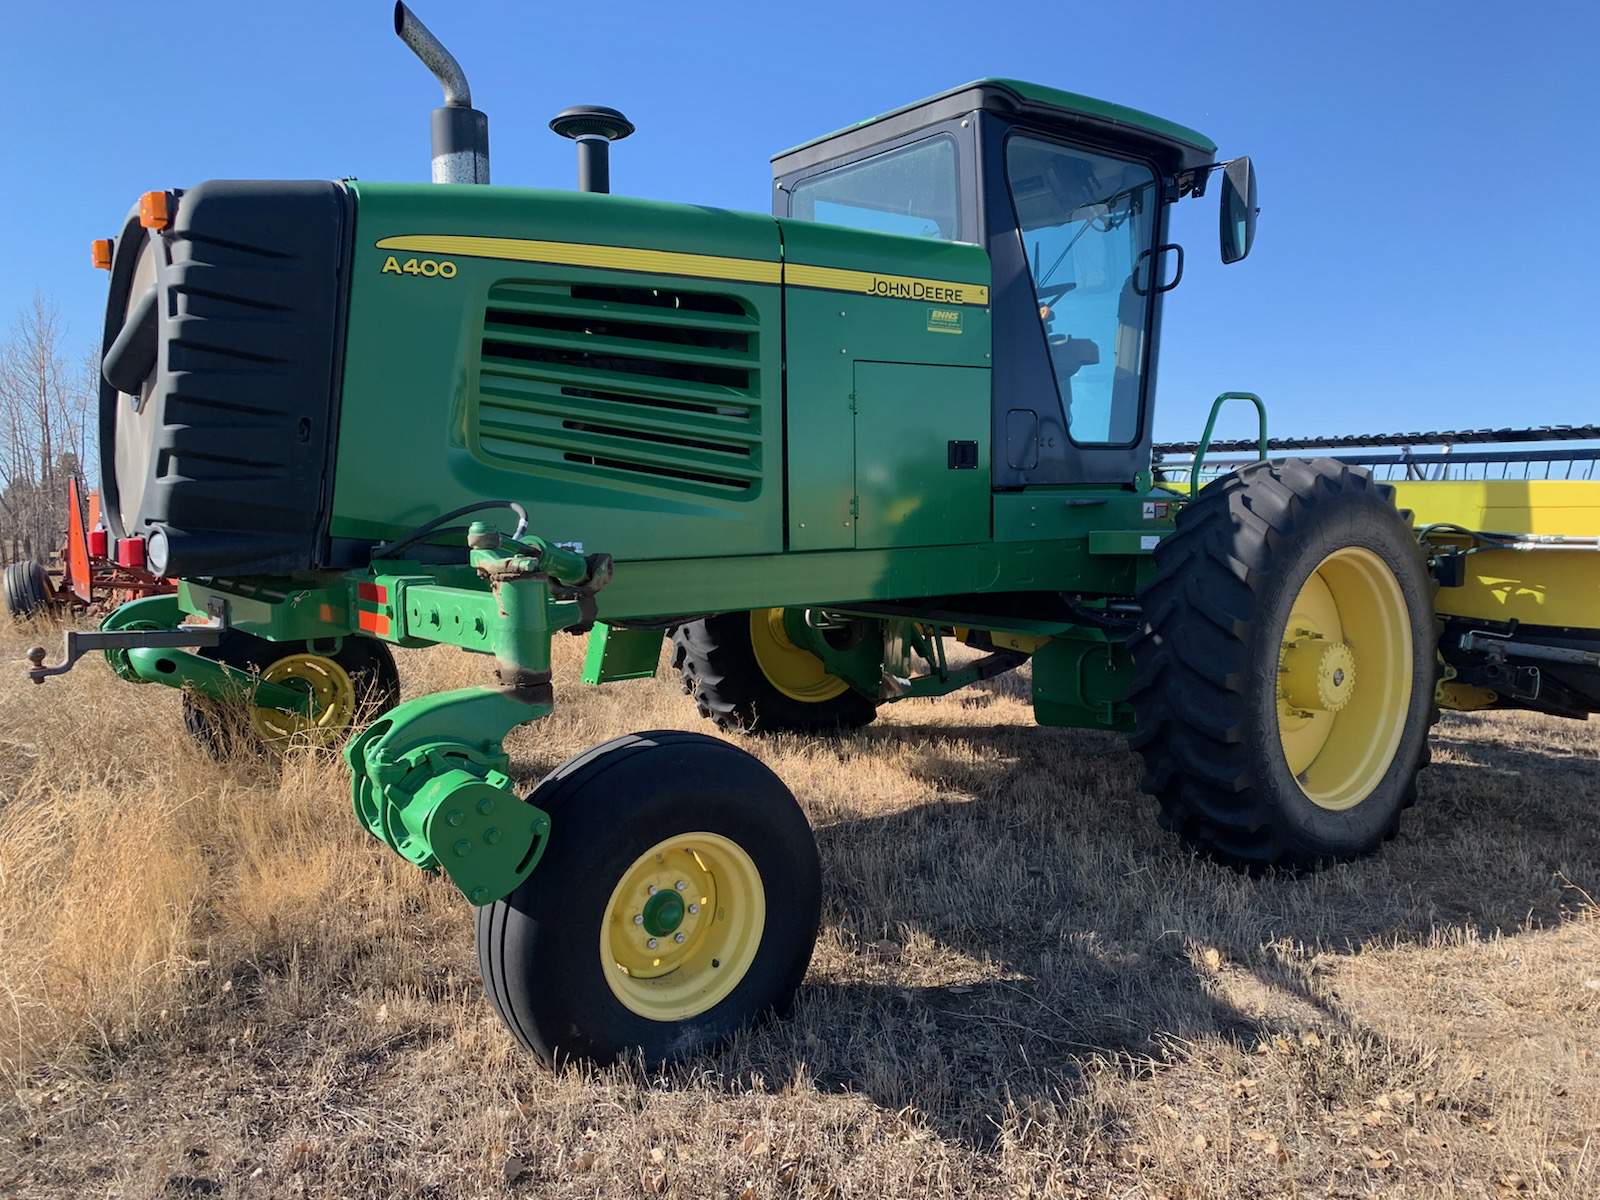 2011 John Deere A400 Swather For Sale In Weyburn Sk Ironsearch 0357